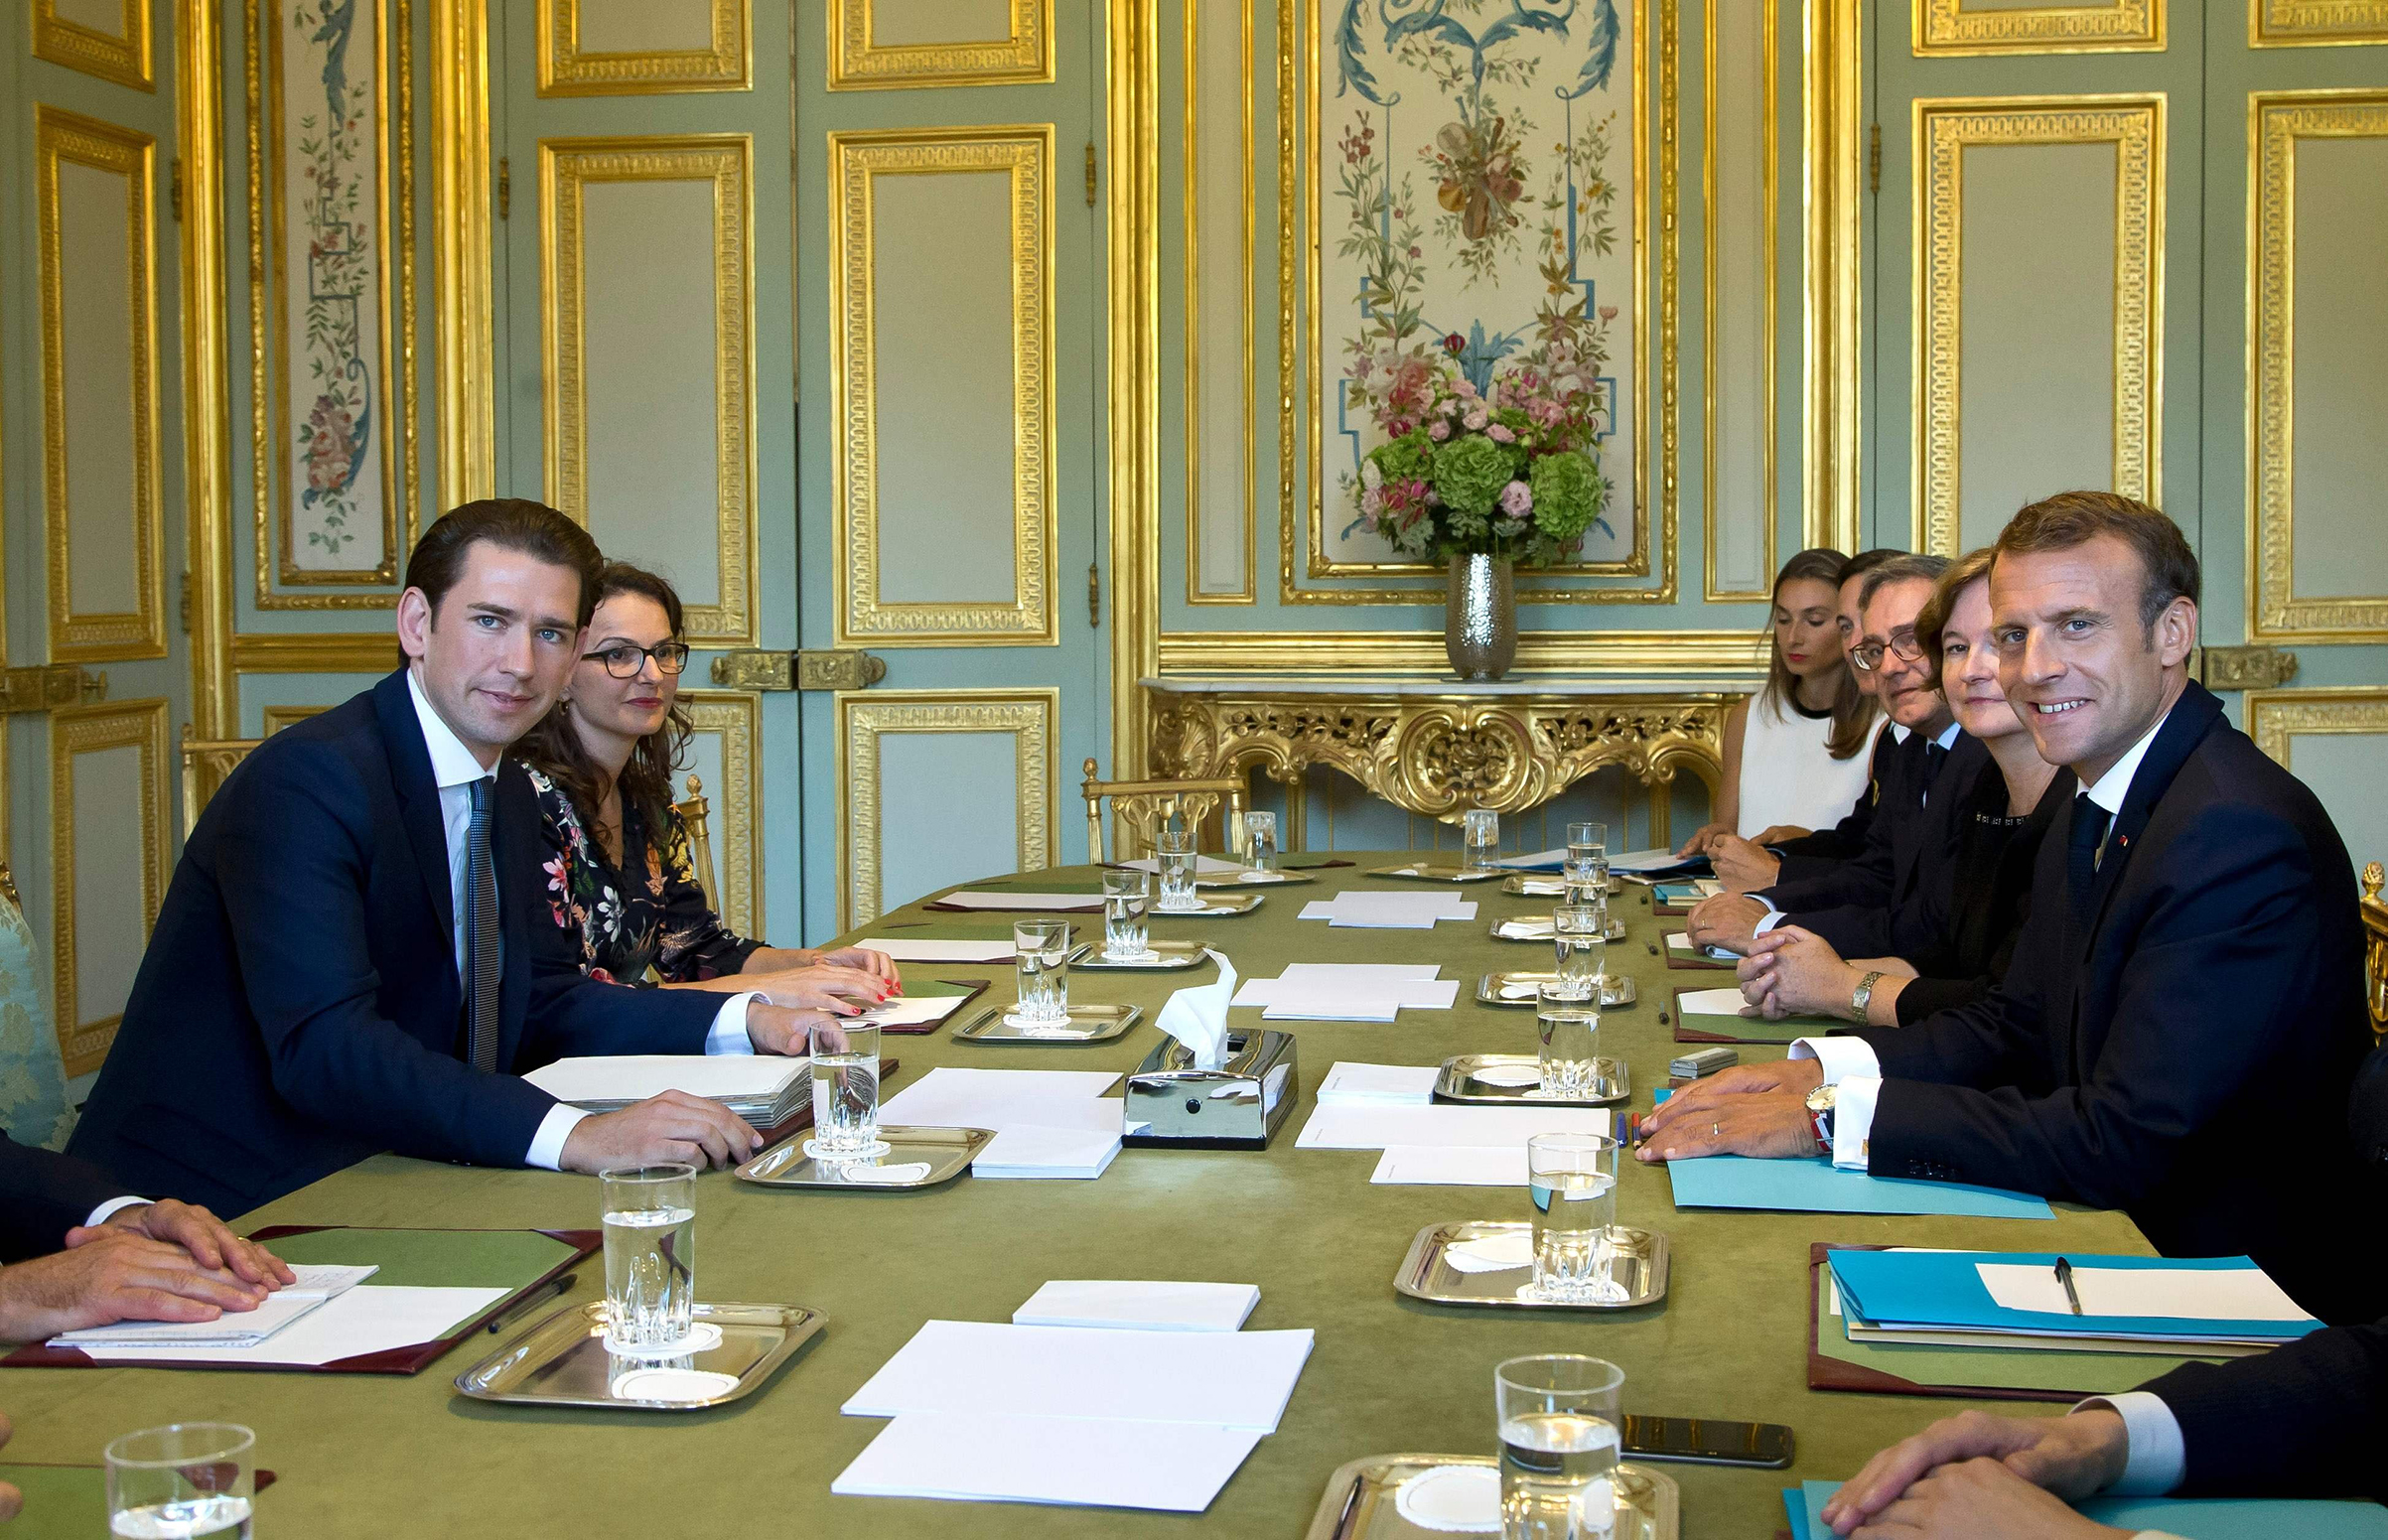 Kurz meets with Macron in Paris in September, days before a summit in part devoted to the issue of migration. While Macron has sought to isolate his far-right opponents, Kurz chose to bring them into his government (Michel Euler—AFP/Getty Images)